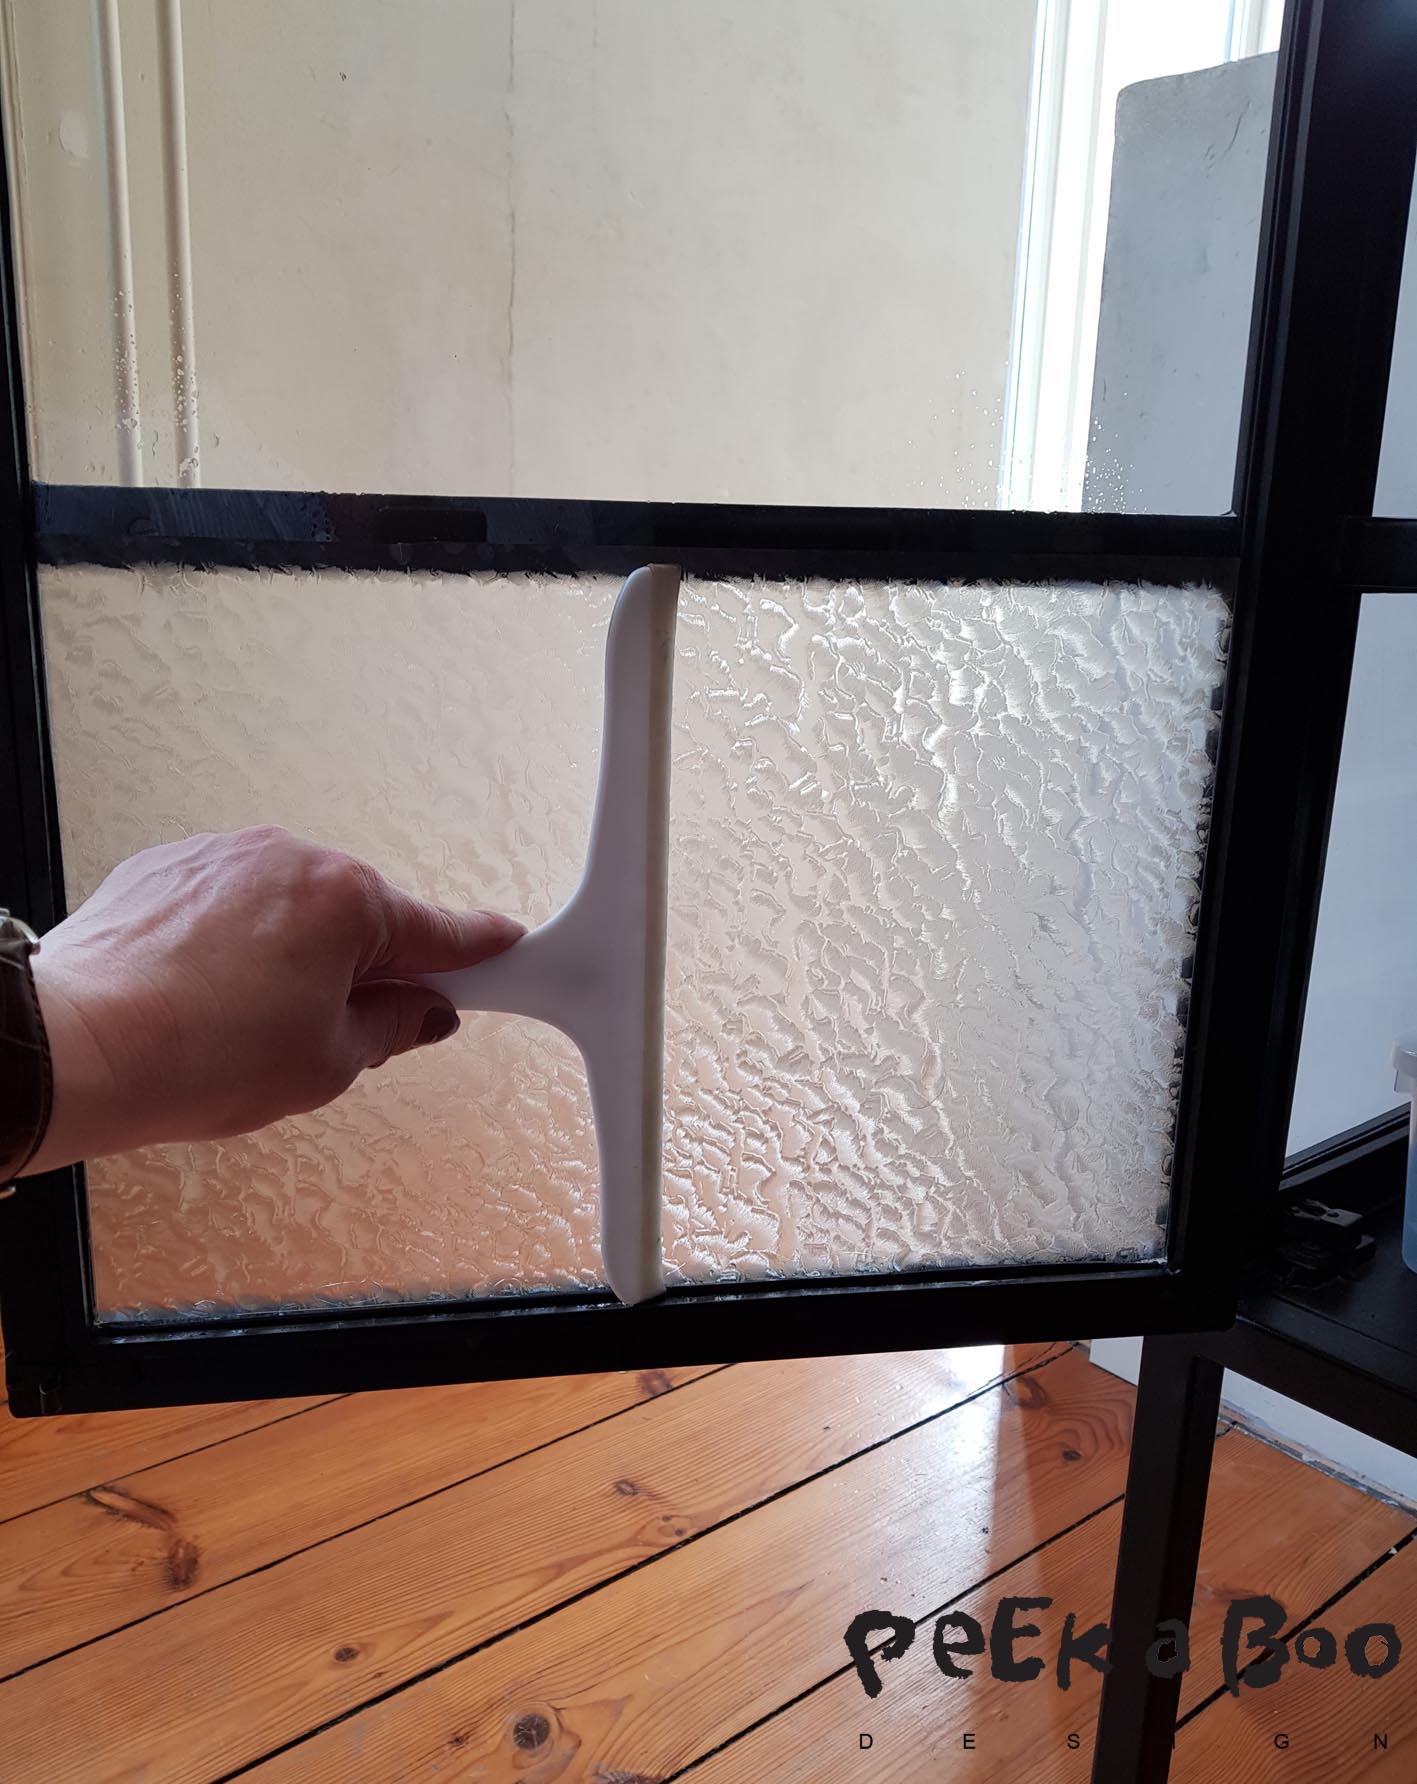 Ensure that there is no water between the glass and the film, by using the window scraper.